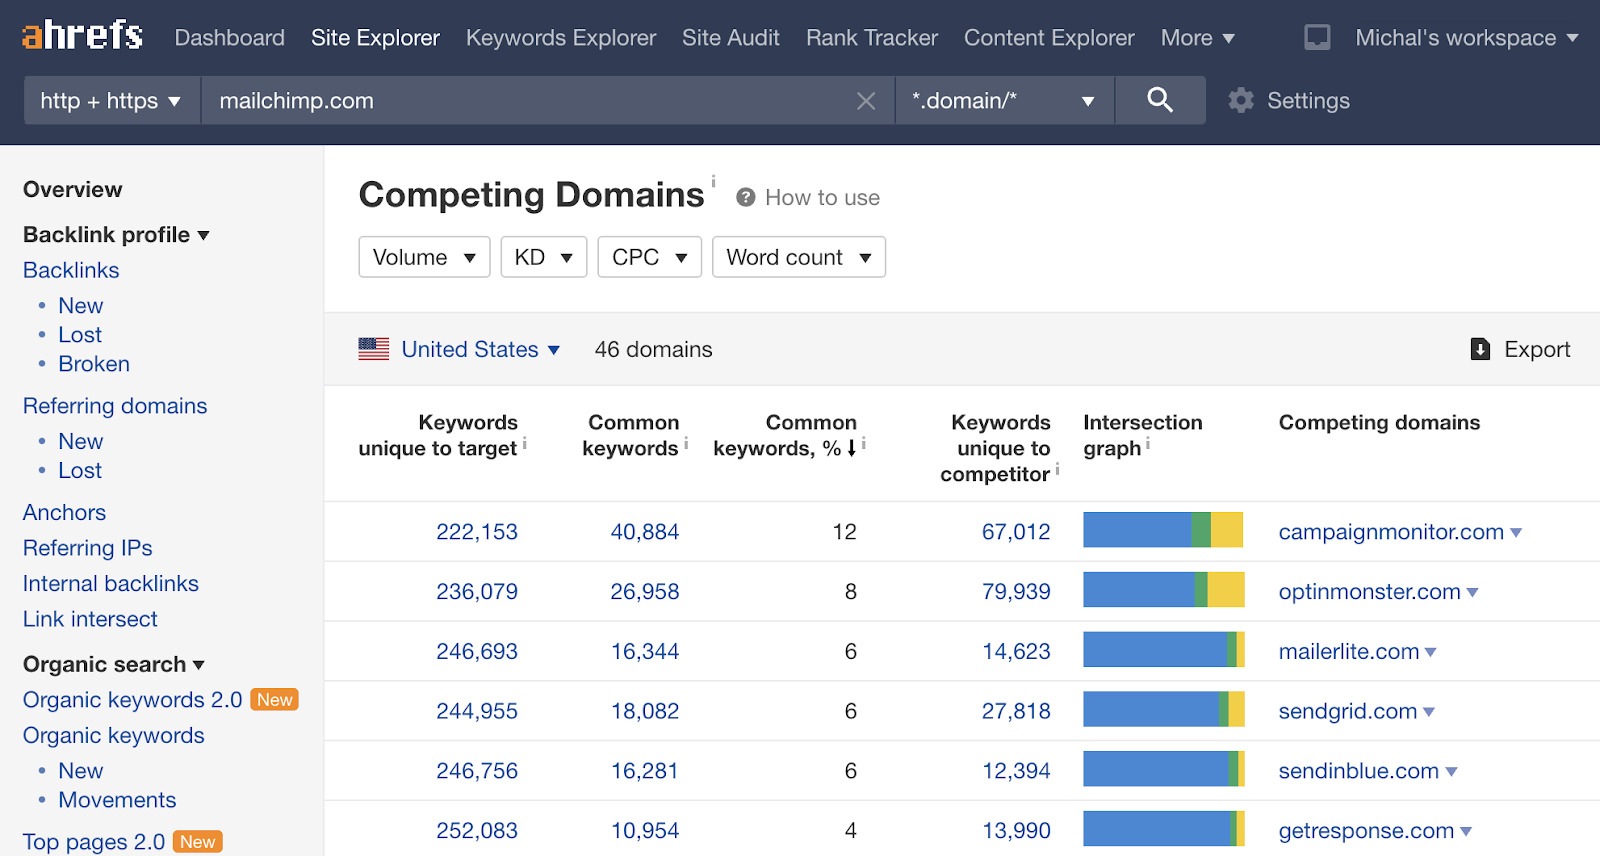 Source: Ahrefs competitor analysis